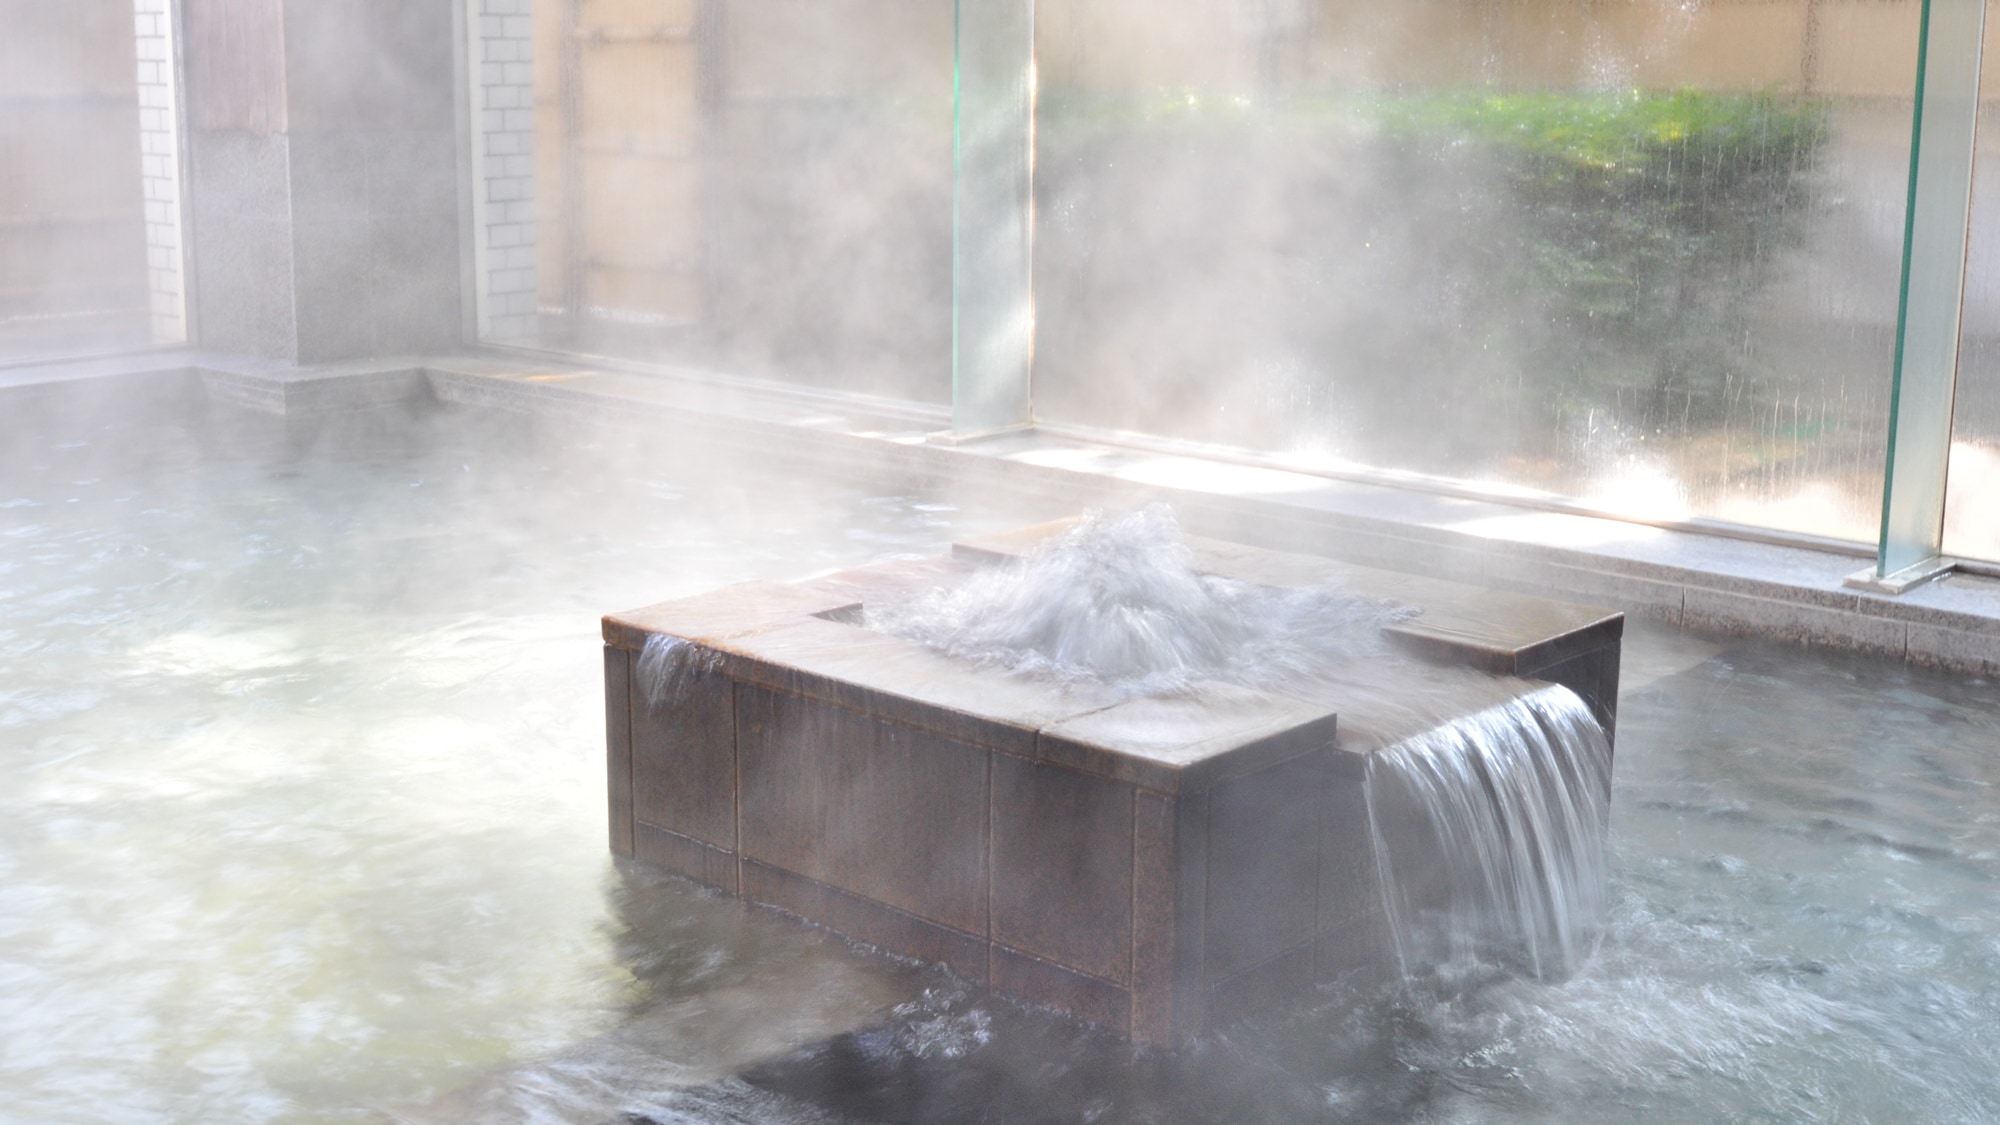 [Shirasagiyu] A hot spring that flows directly from the source.